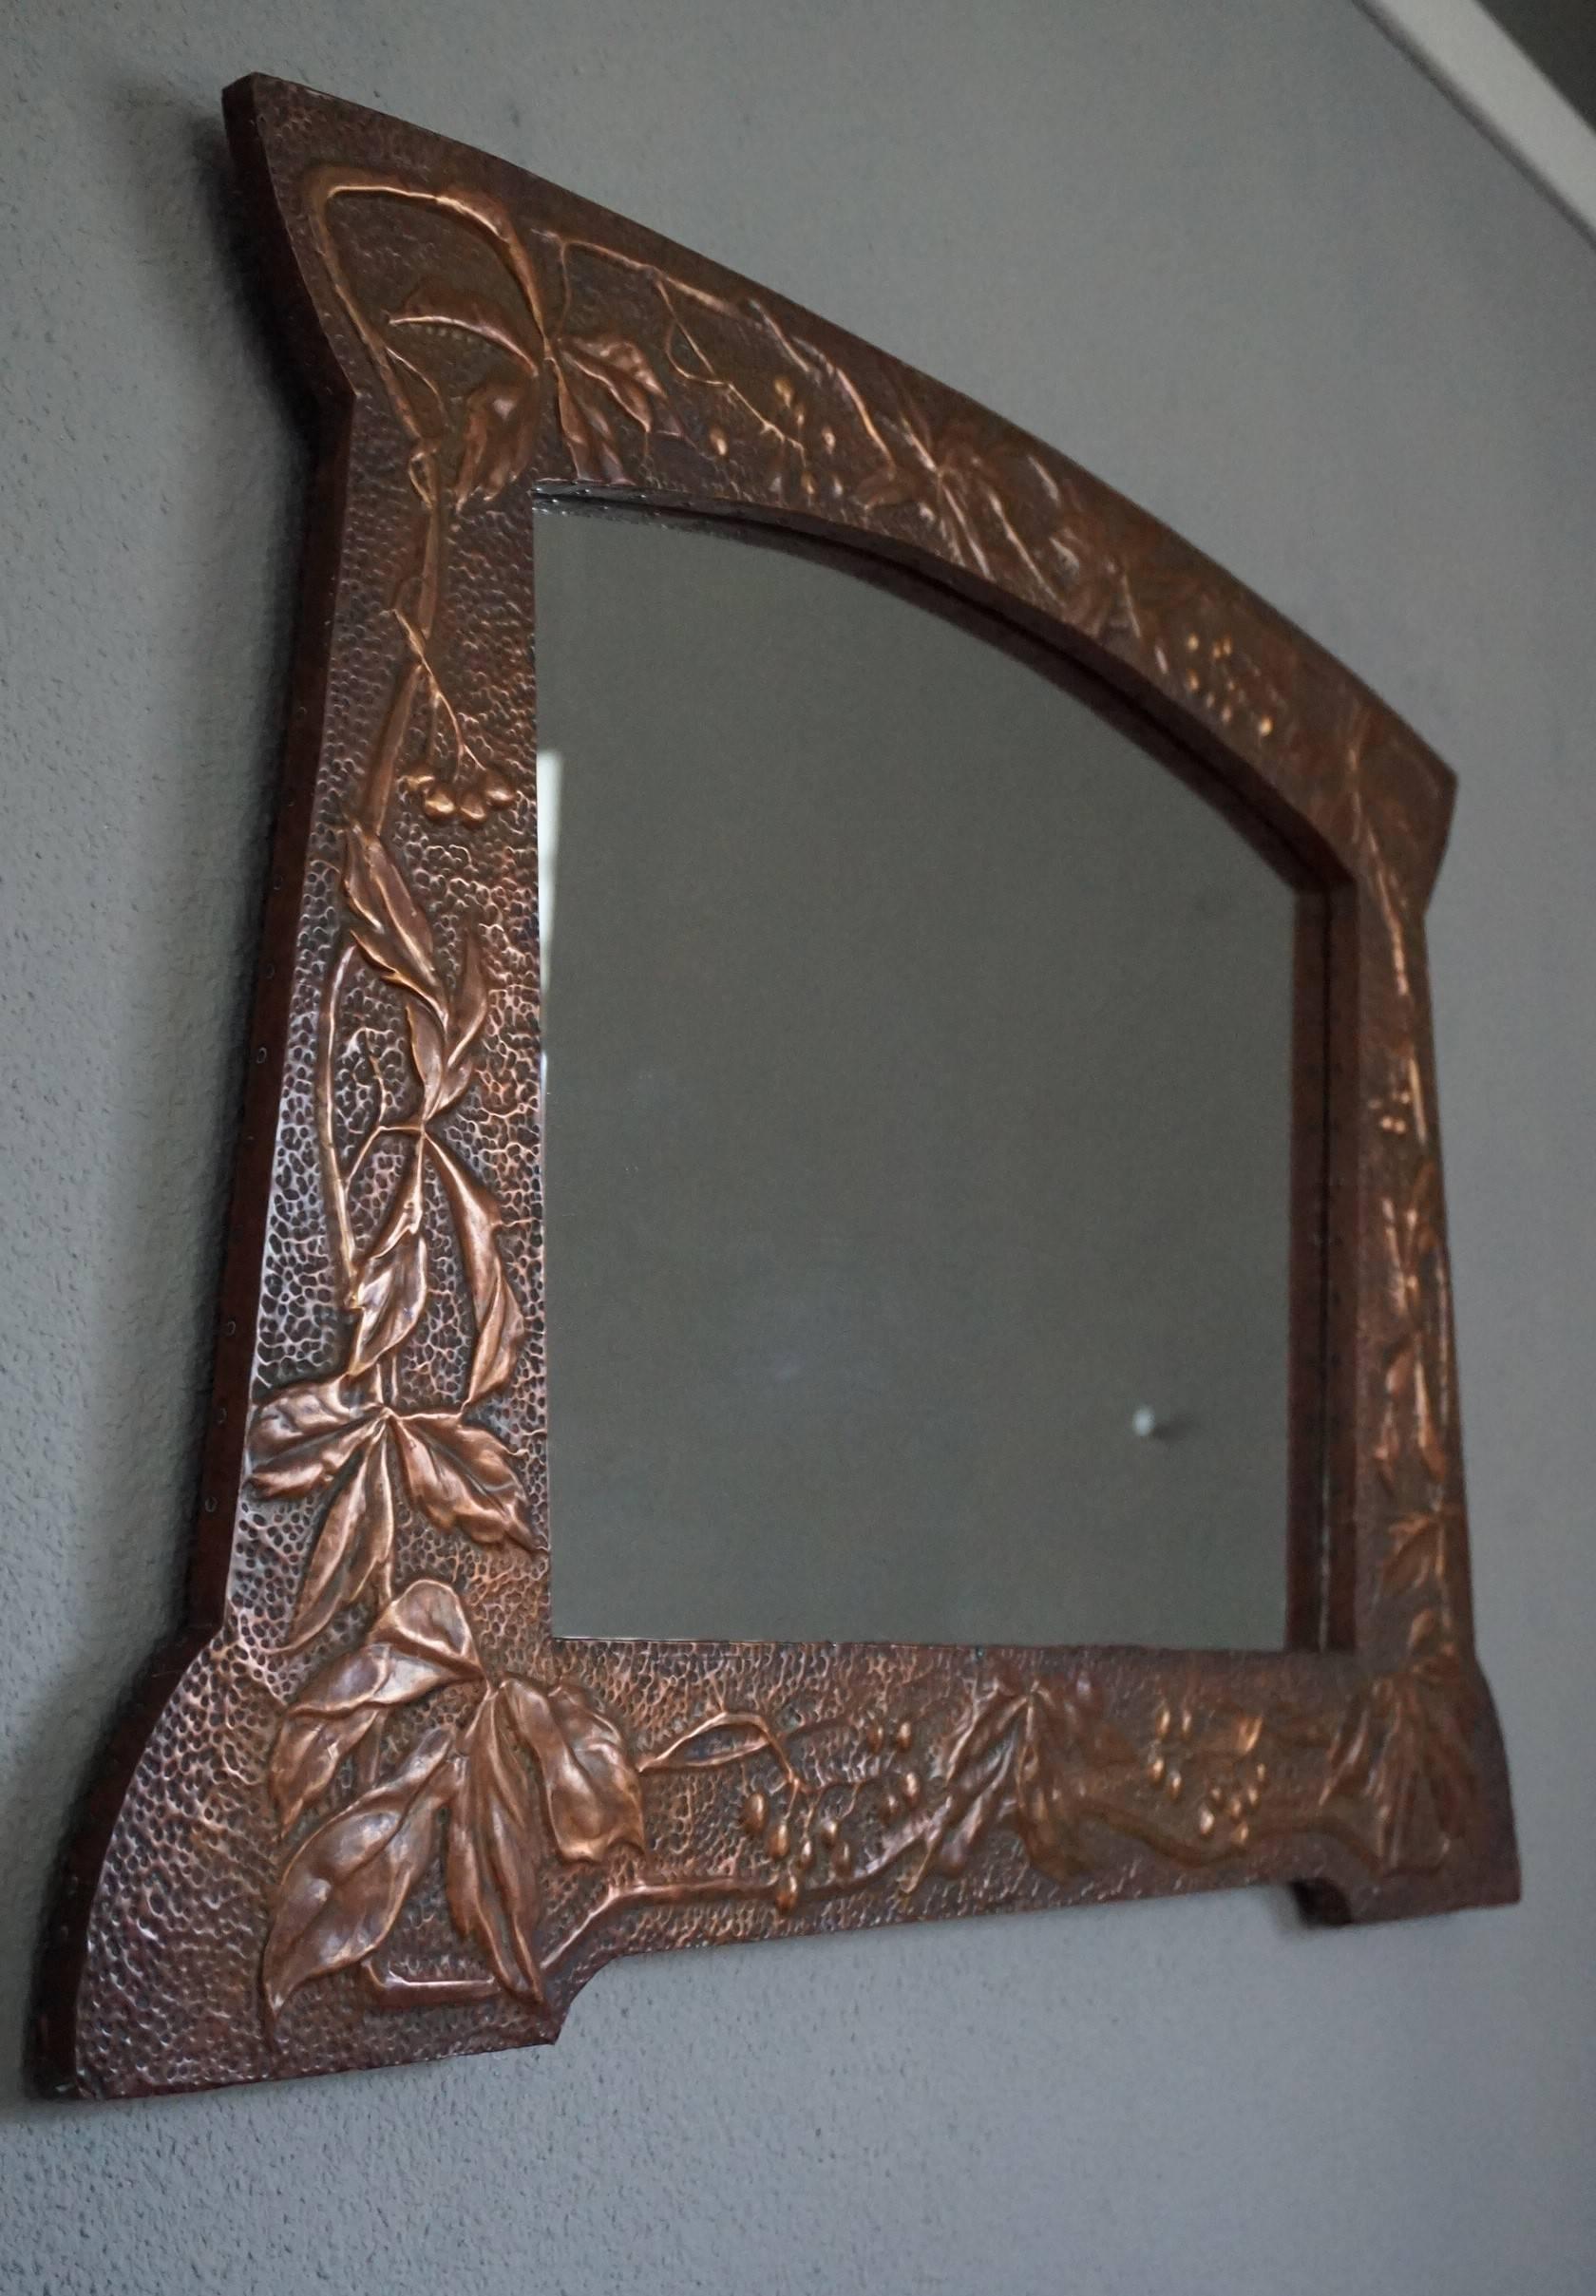 Beautiful turn of the century Arts and Crafts workmanship.

This entirely hand-crafted Arts and Crafts mirror from circa 1890-1910 is in the best condition possible. The way in which the embossed and realistic leaves and berries decorate this fine